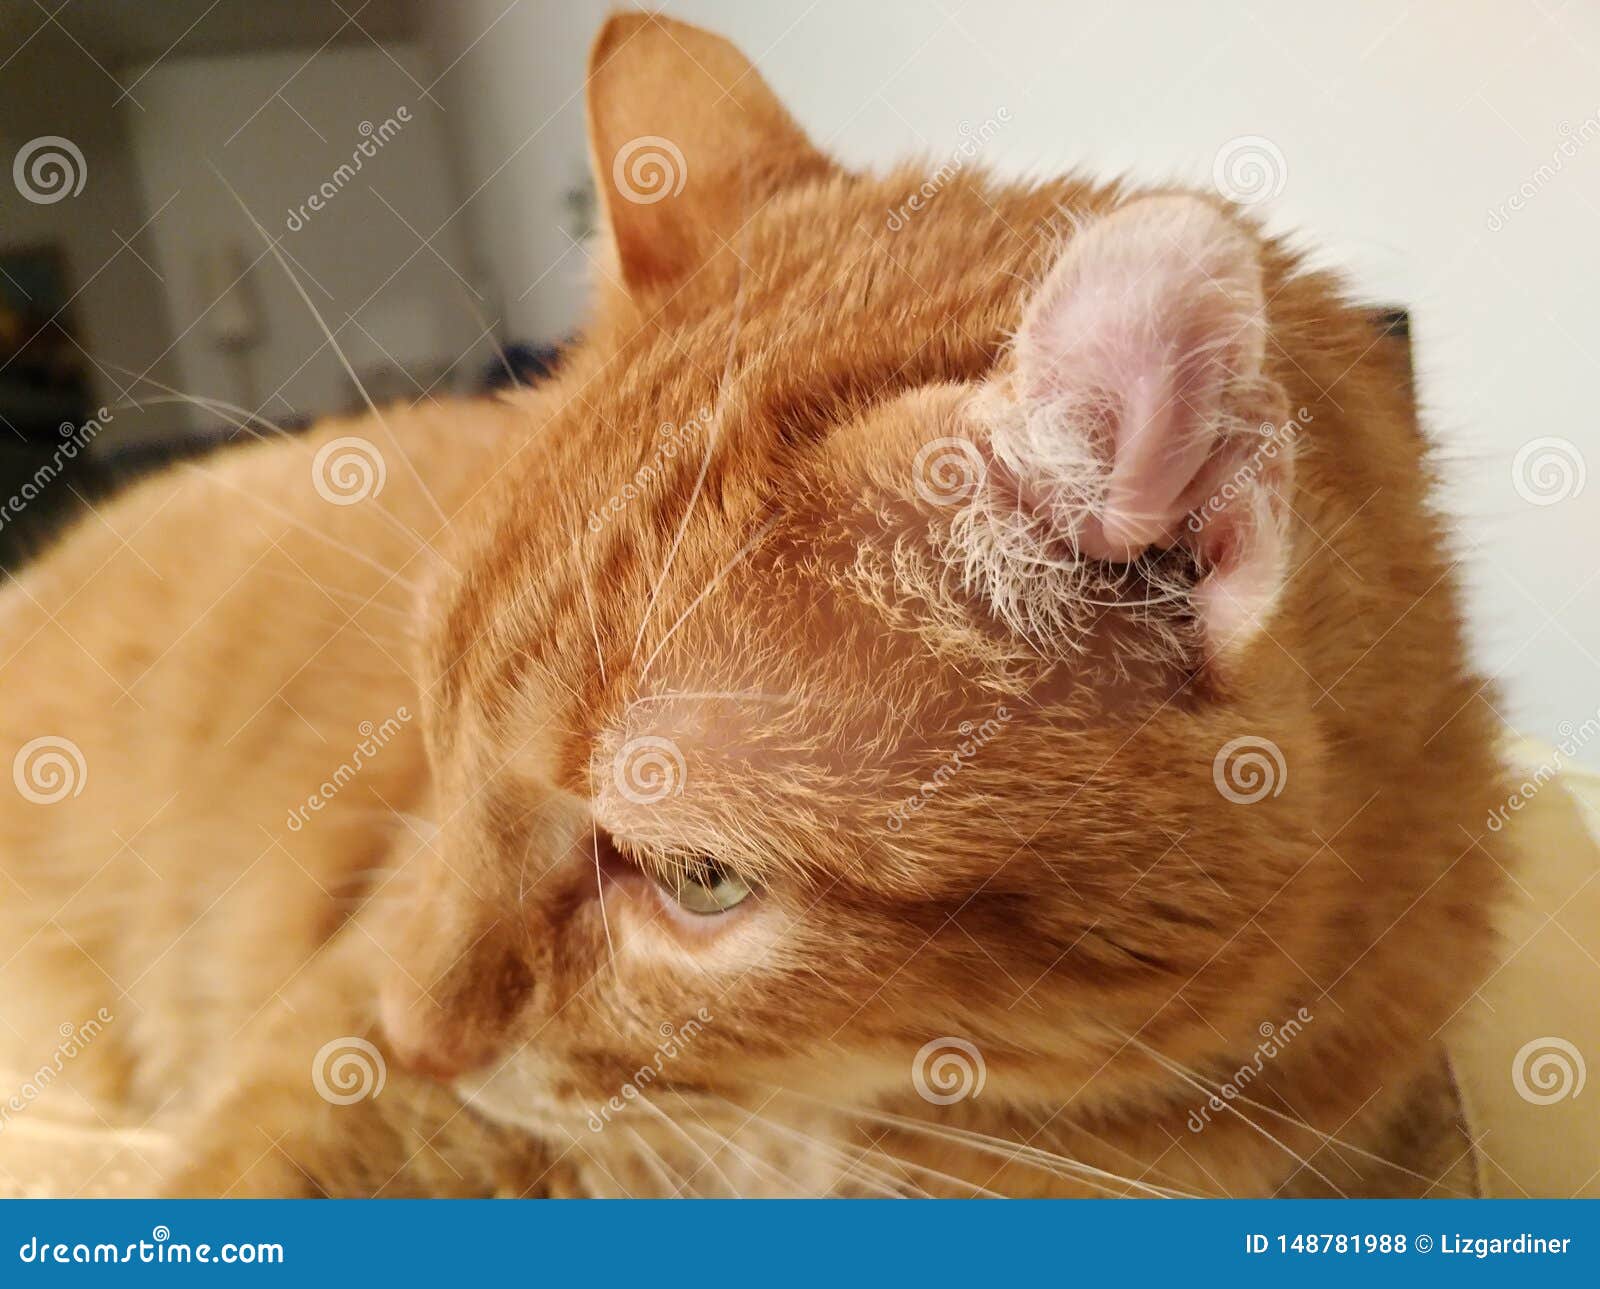 Cats Ear Swelled Up toxoplasmosis